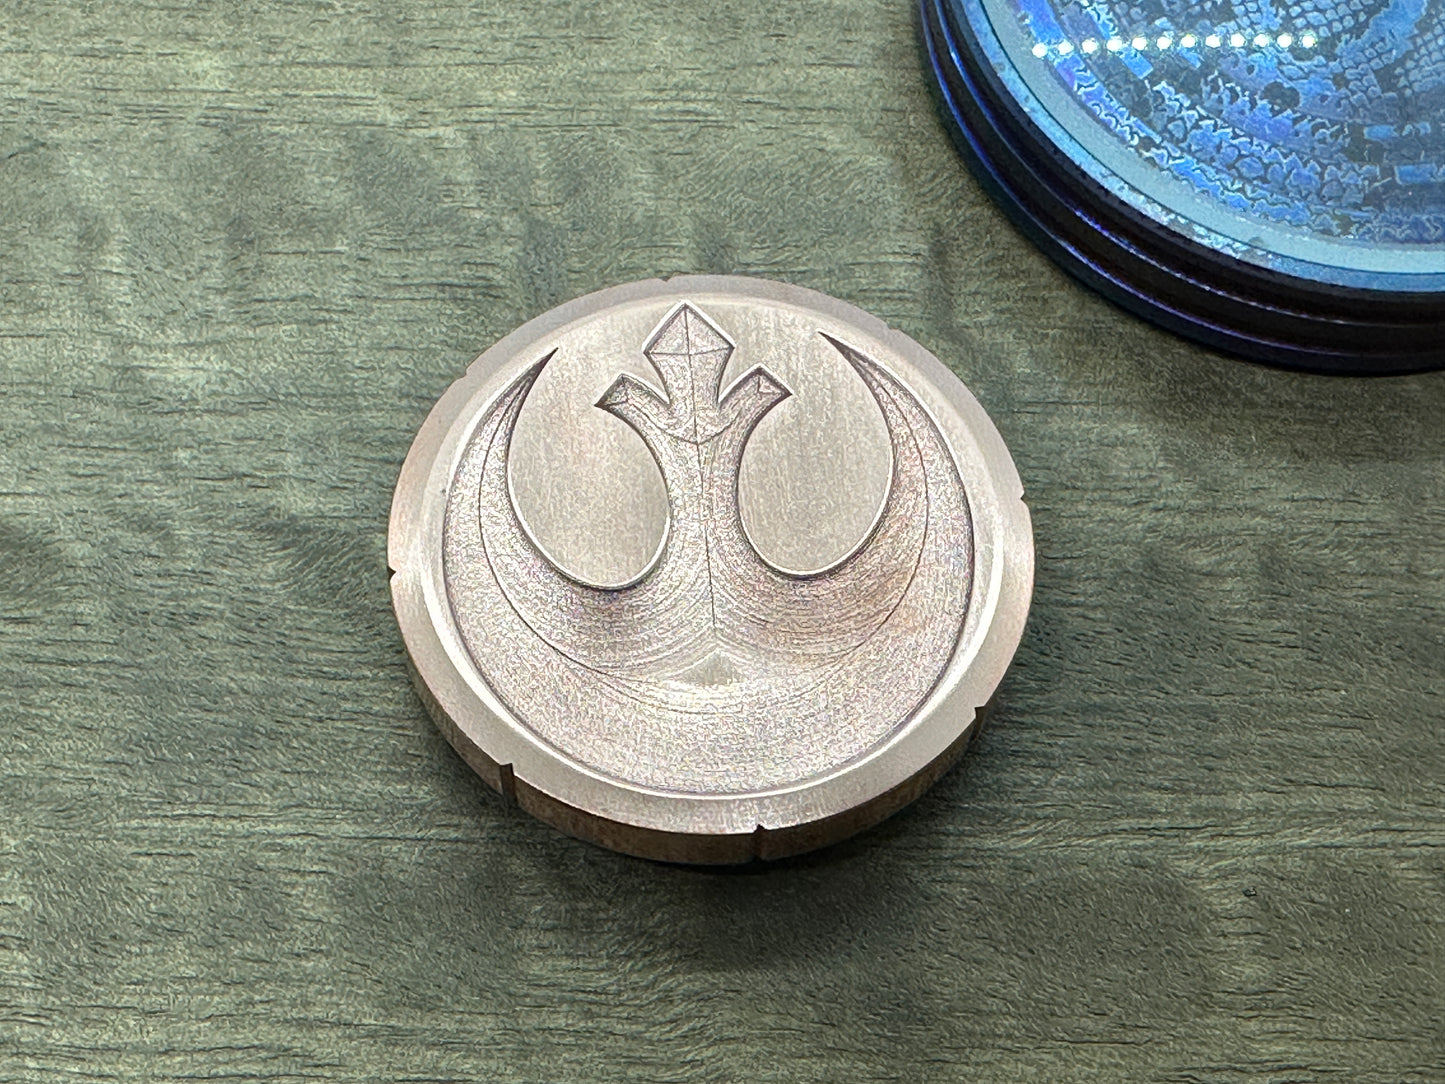 REBEL ALLIANCE Star Wars Deep engraved Copper Spinning Worry Coin Spinning Top